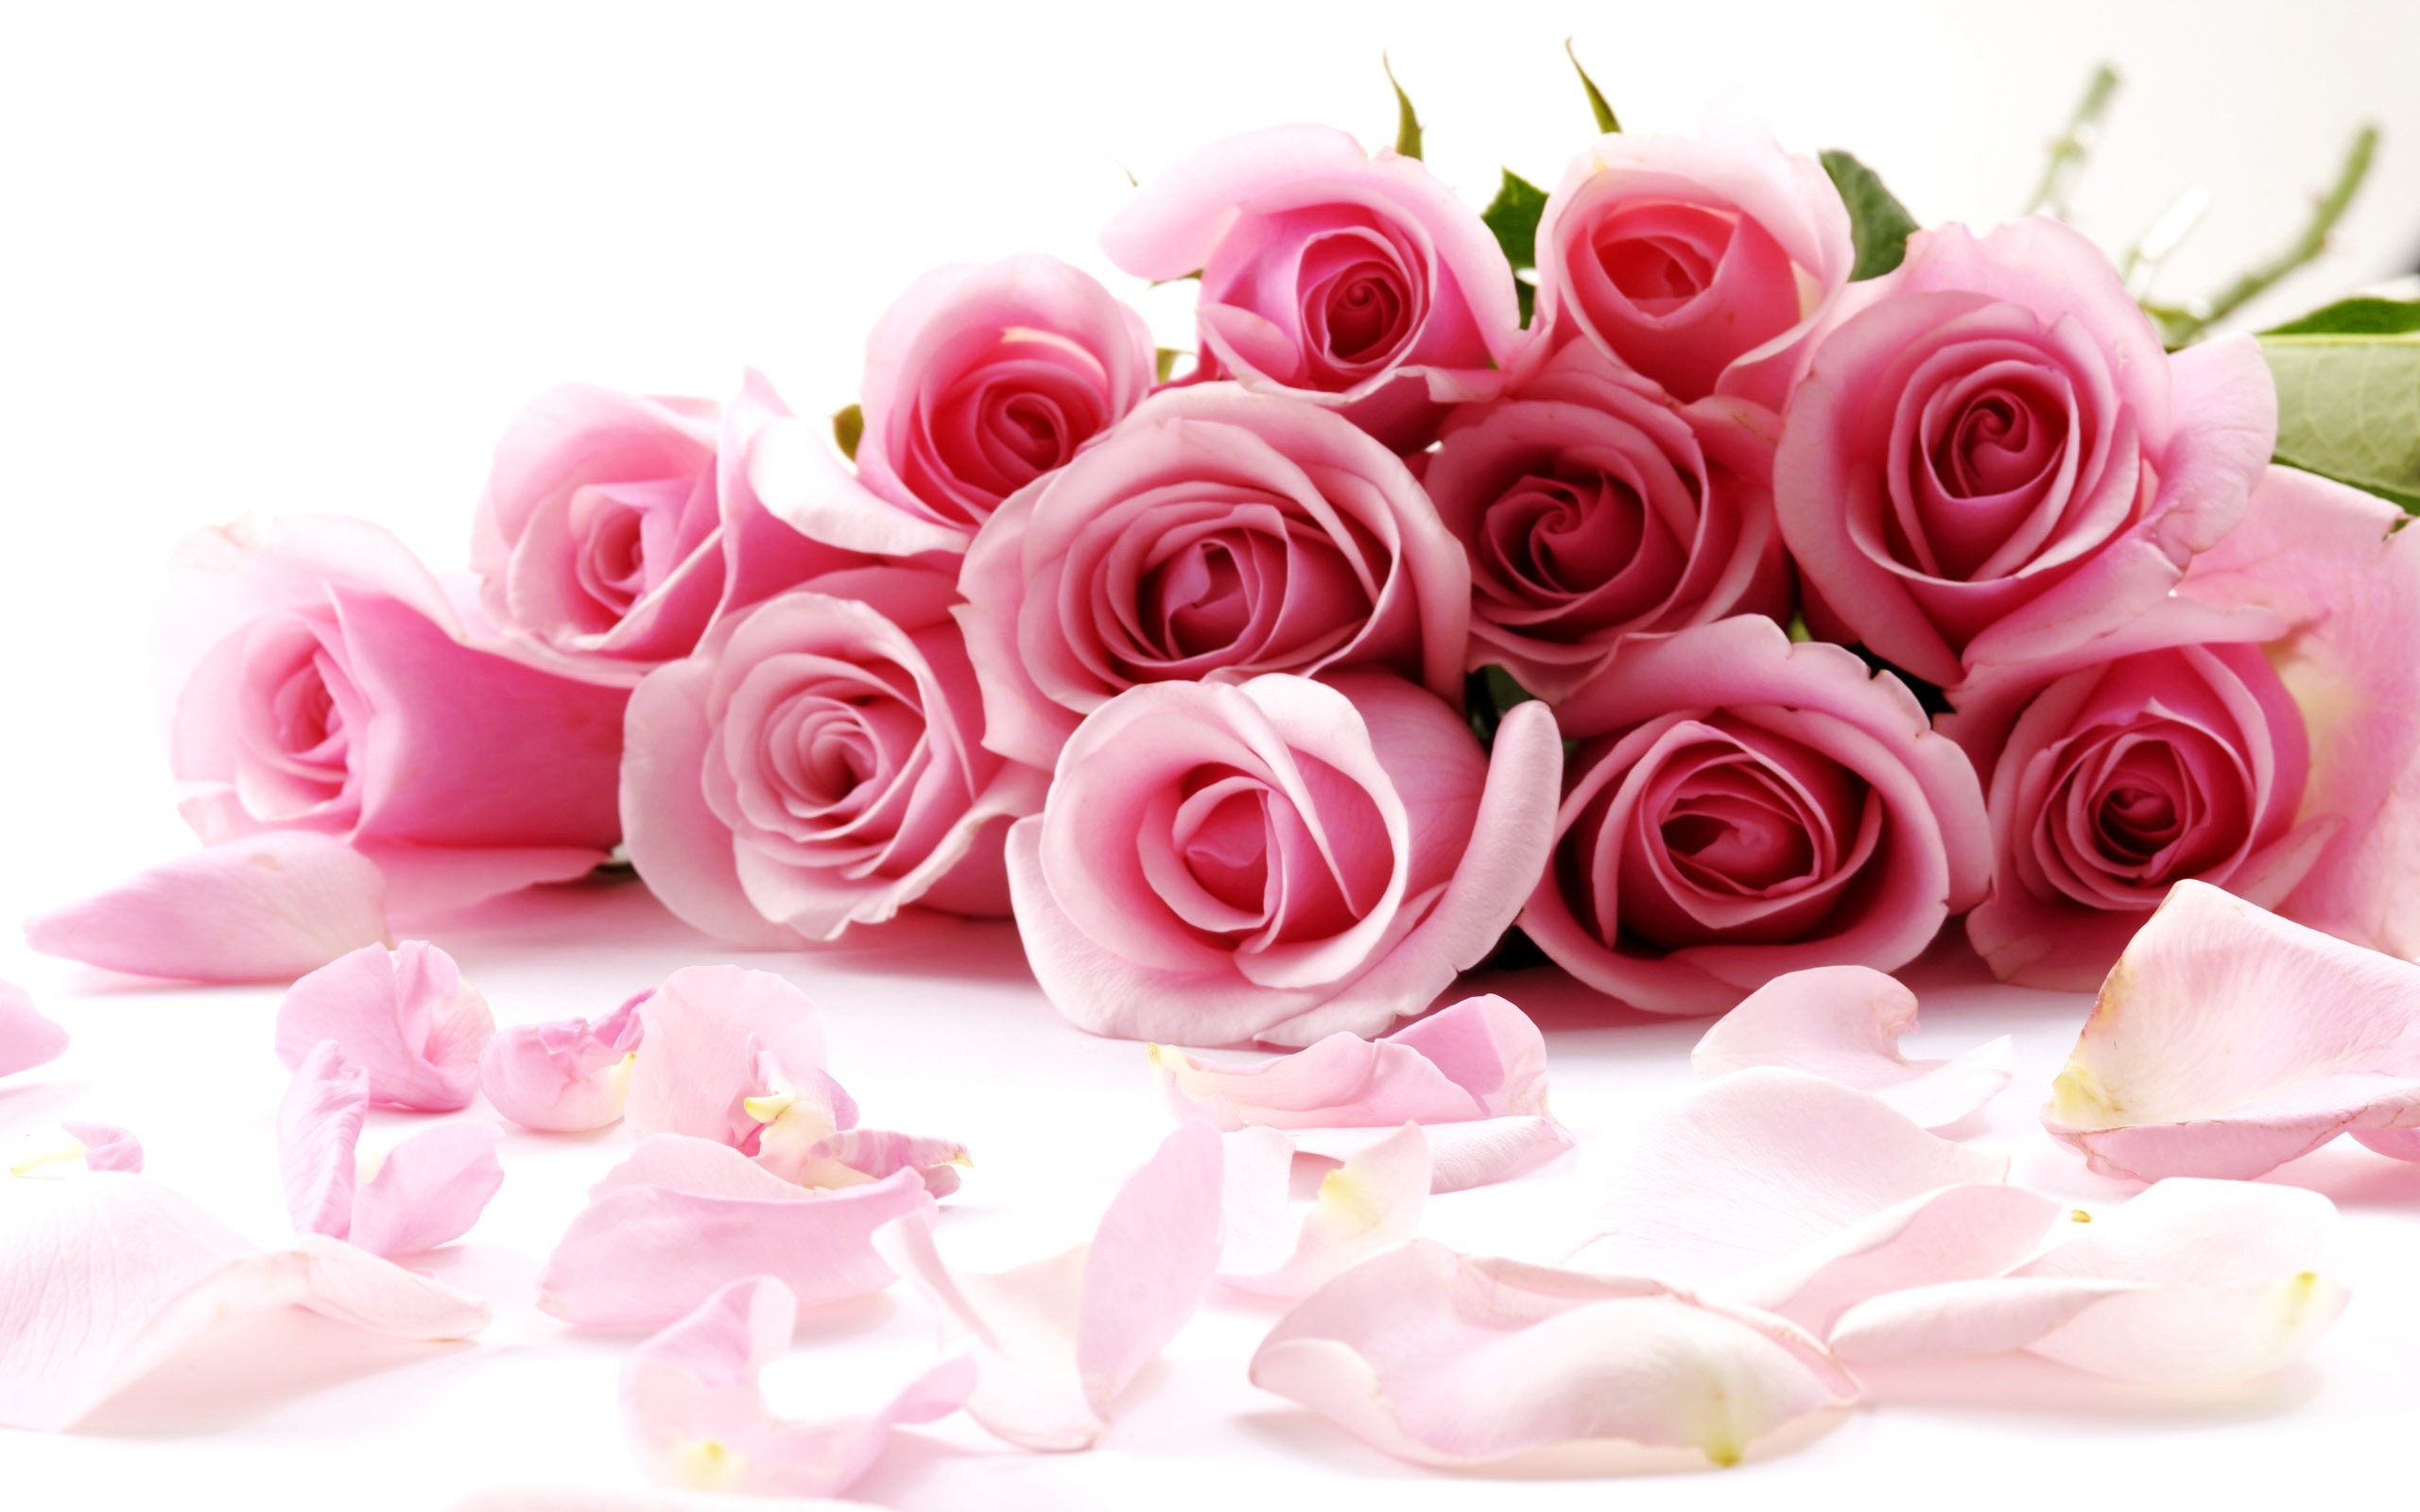 Pink Roses Isolated on White Background | Photo and Desktop Wallpaper